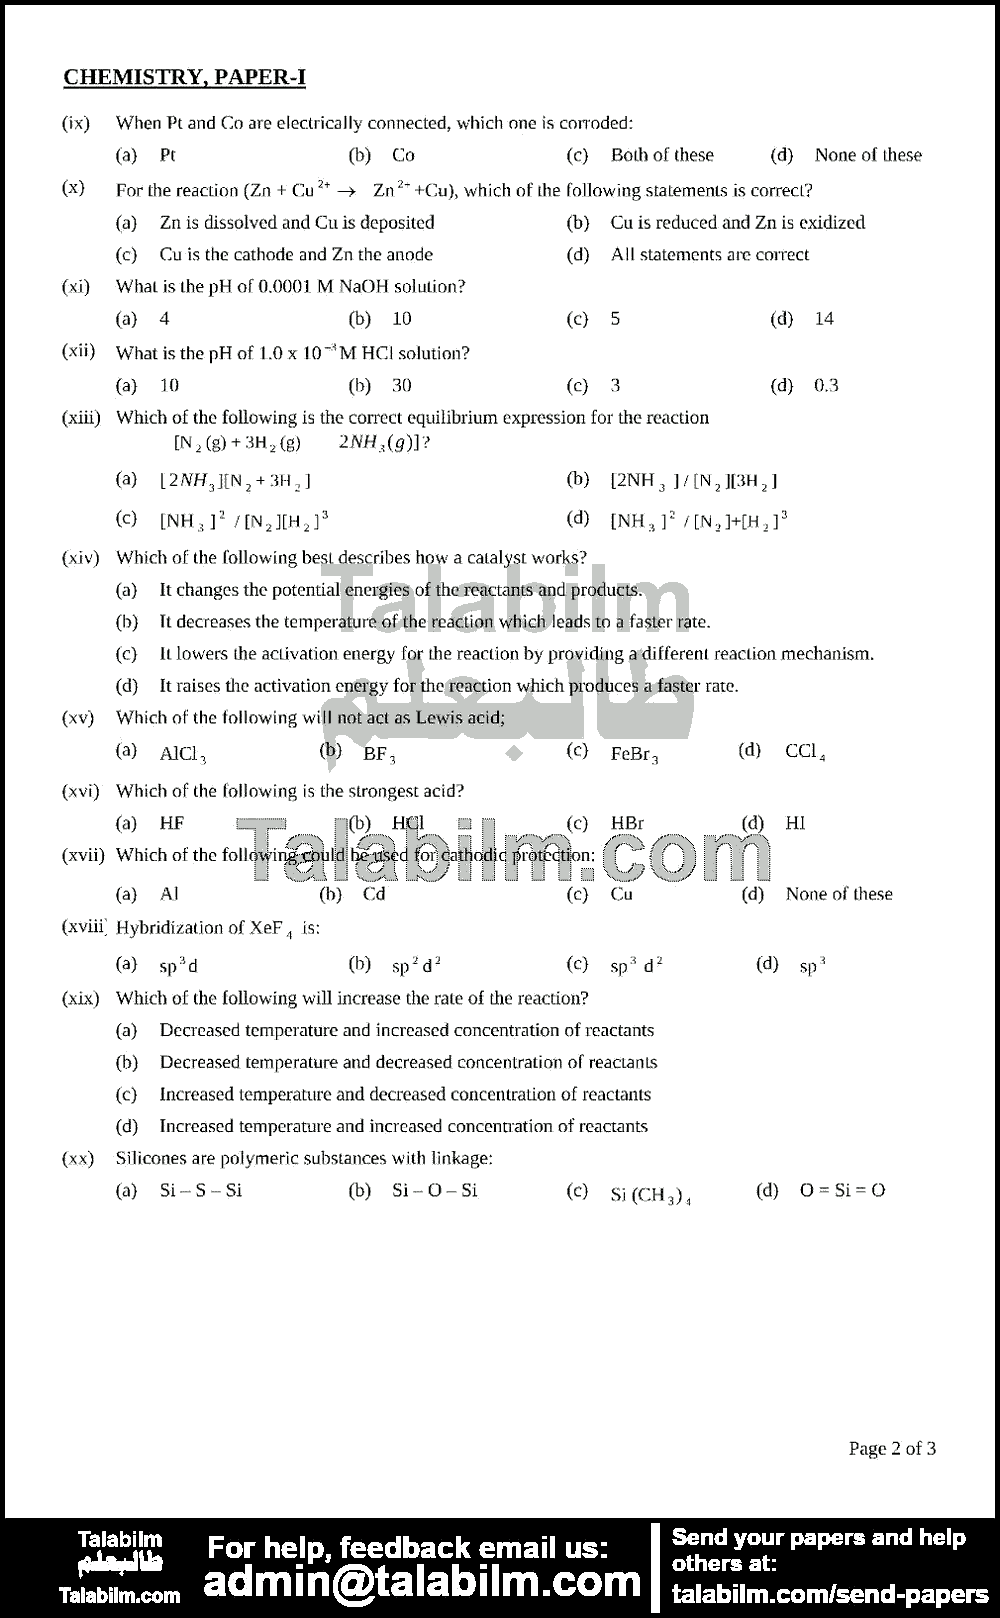 Chemistry 0 past paper for 2011 Page No. 2